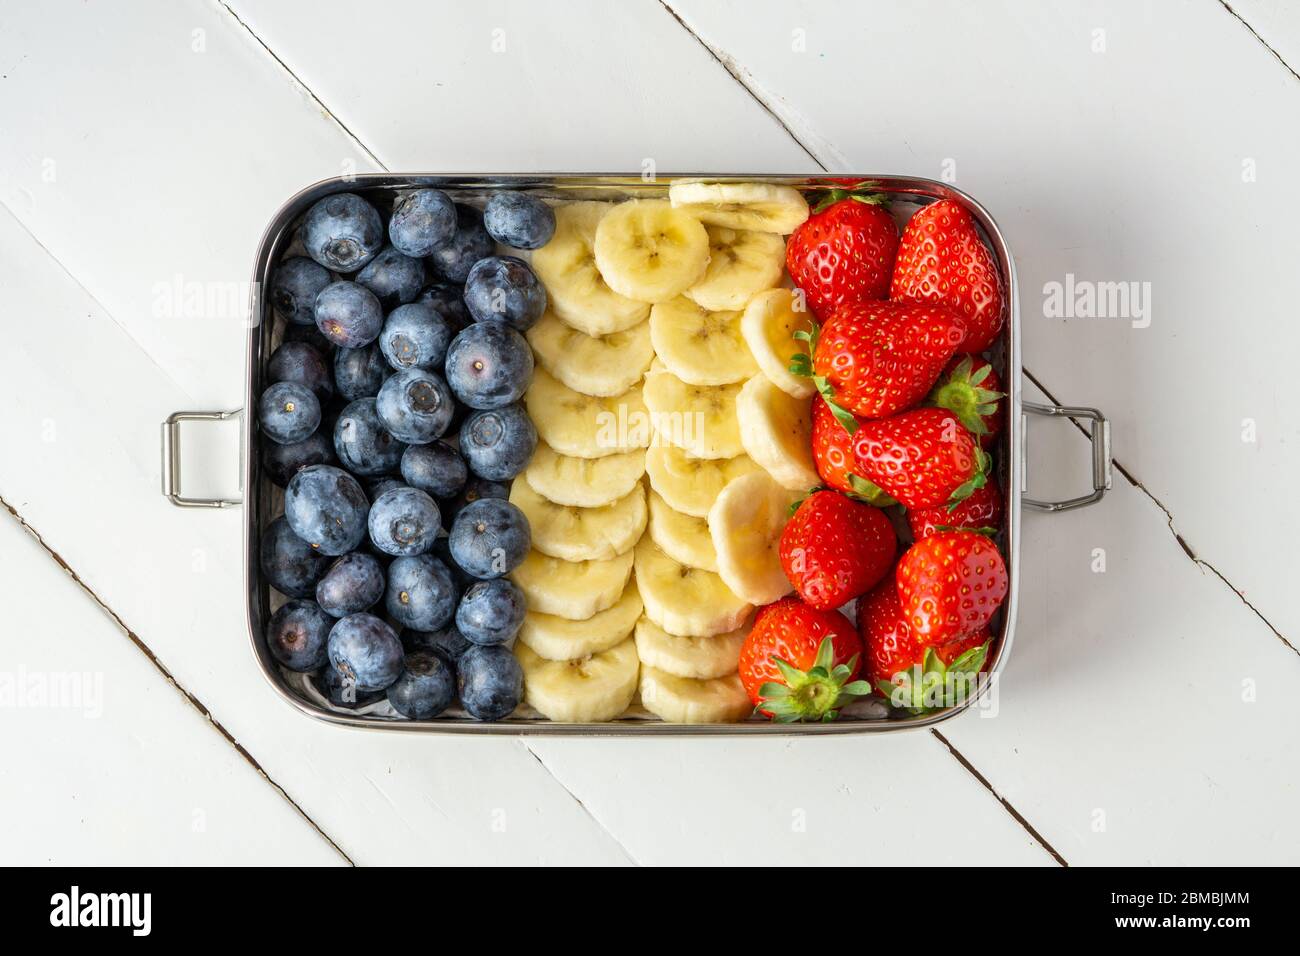 https://c8.alamy.com/comp/2BMBJMM/blueberries-bananas-and-strawberries-snack-in-a-big-stainless-steel-food-container-plastic-free-lunch-box-isolated-on-white-background-zero-waste-2BMBJMM.jpg